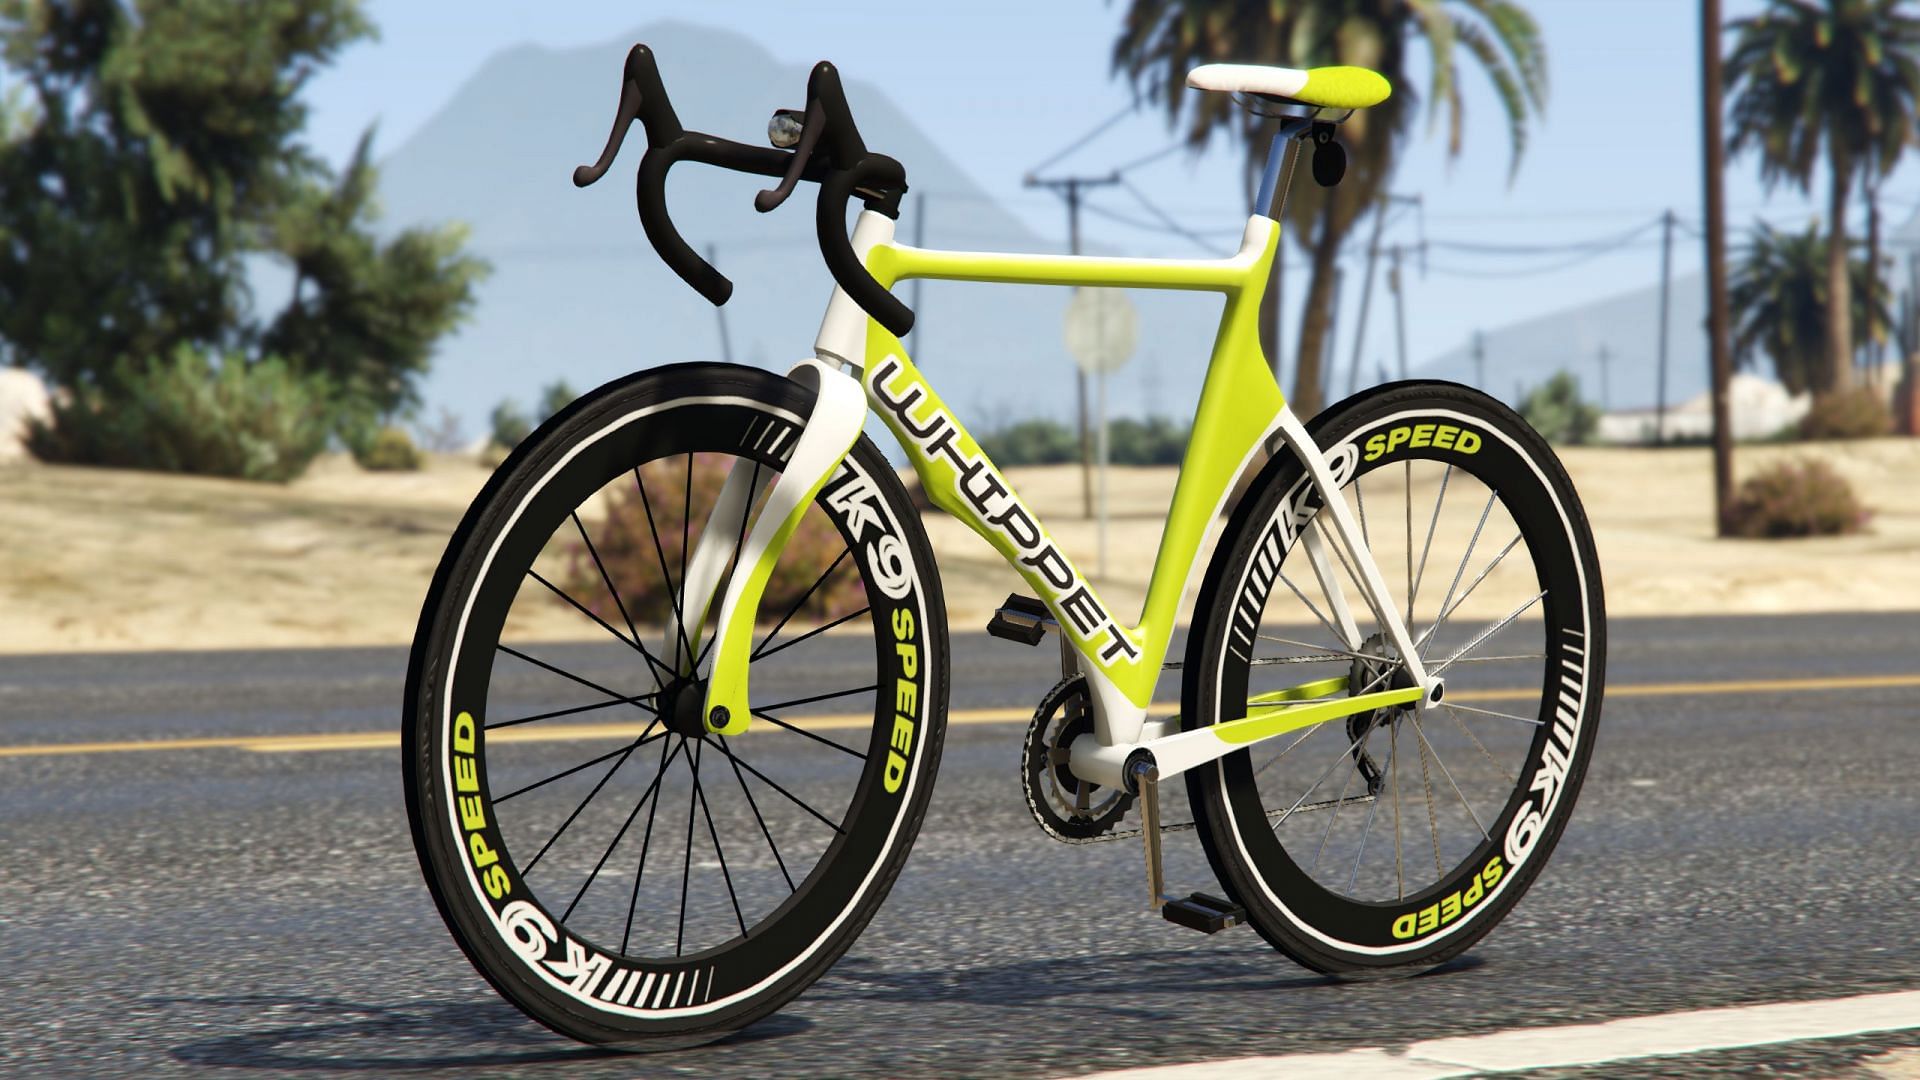 You can now take a leisurely ride through Los Santos with this GTA 5 bike  controller mod